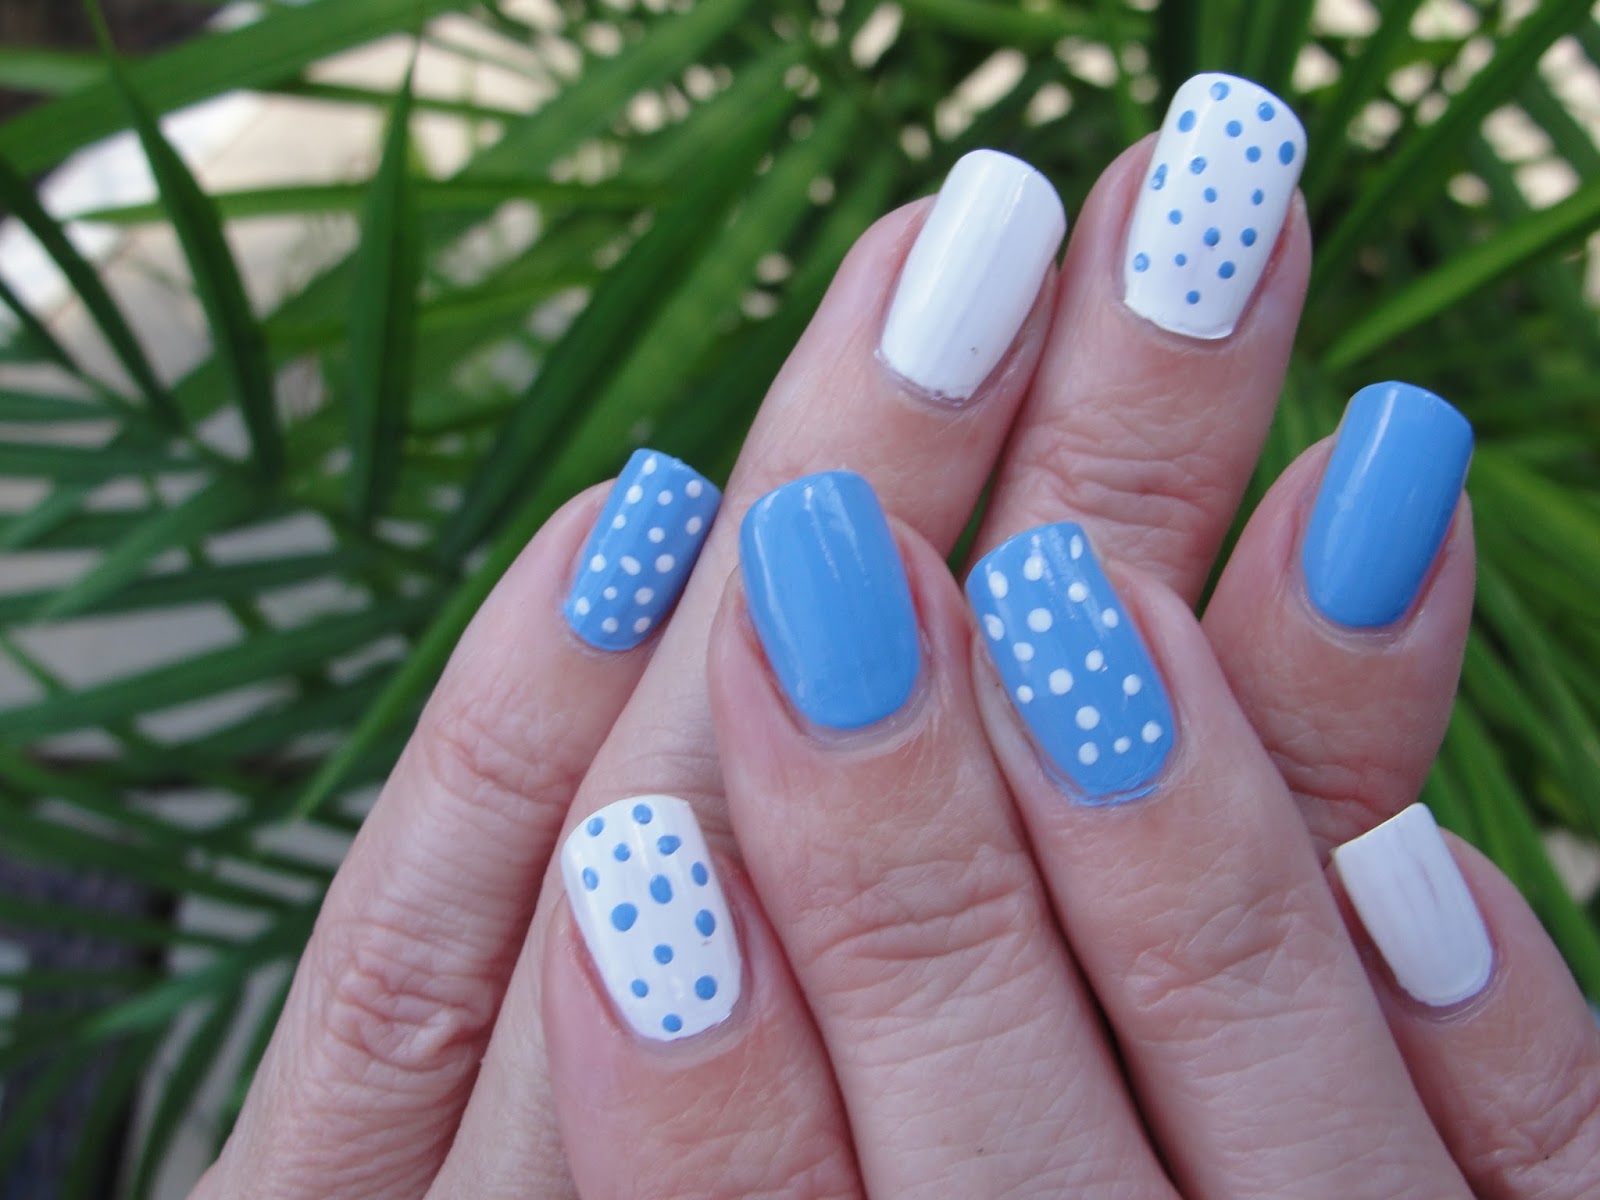 5. Step-by-Step Guide to Polka Dot Nails - wide 10